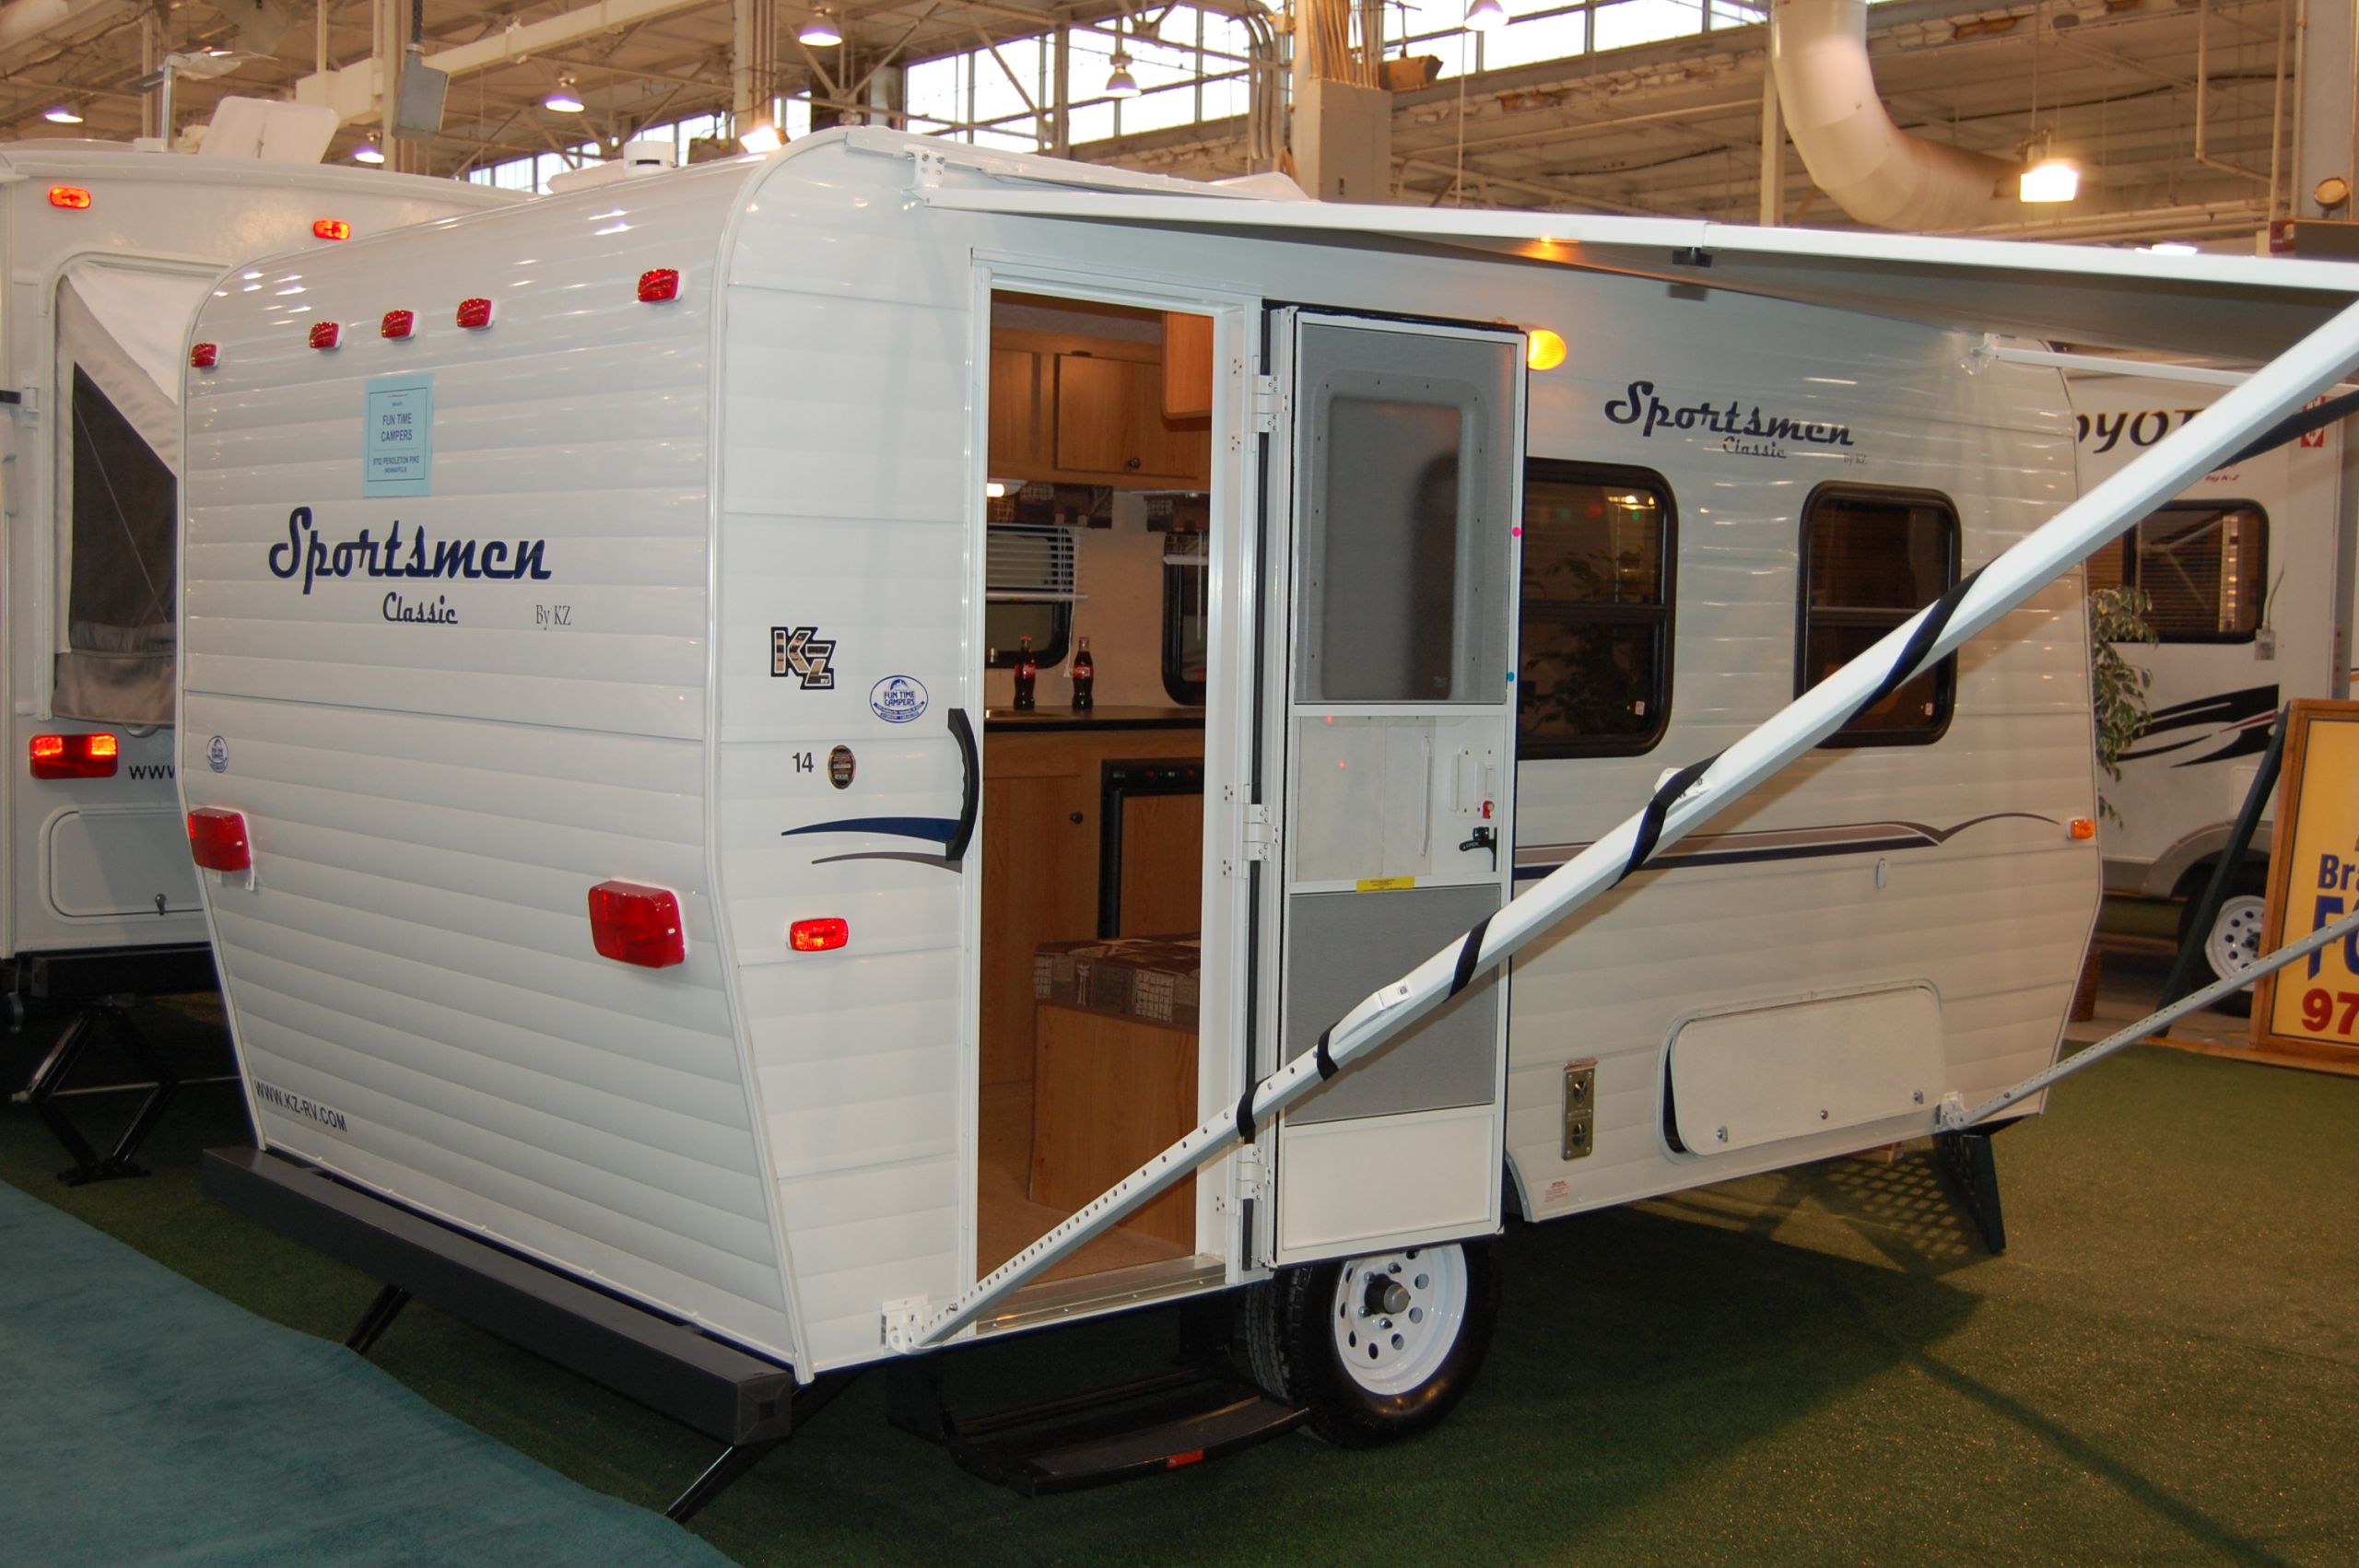 Smallest Travel Trailer With Bathroom
 The Crowded 14′ Floor Plan…